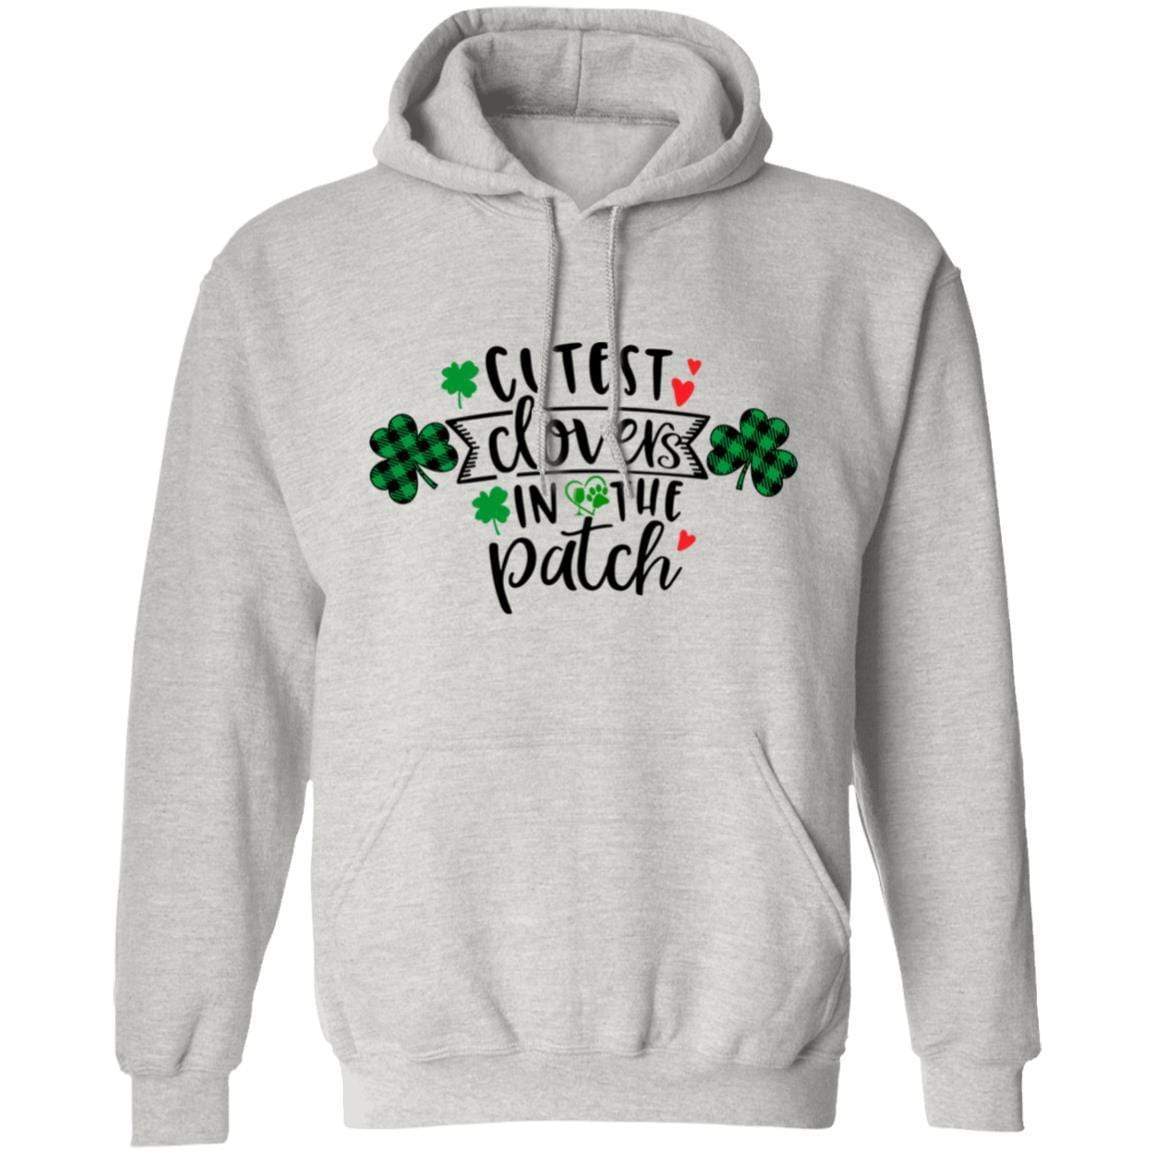 Sweatshirts Ash / S Winey Bitches Co "Cutest Clovers in the Patch" Pullover Hoodie 8 oz. WineyBitchesCo